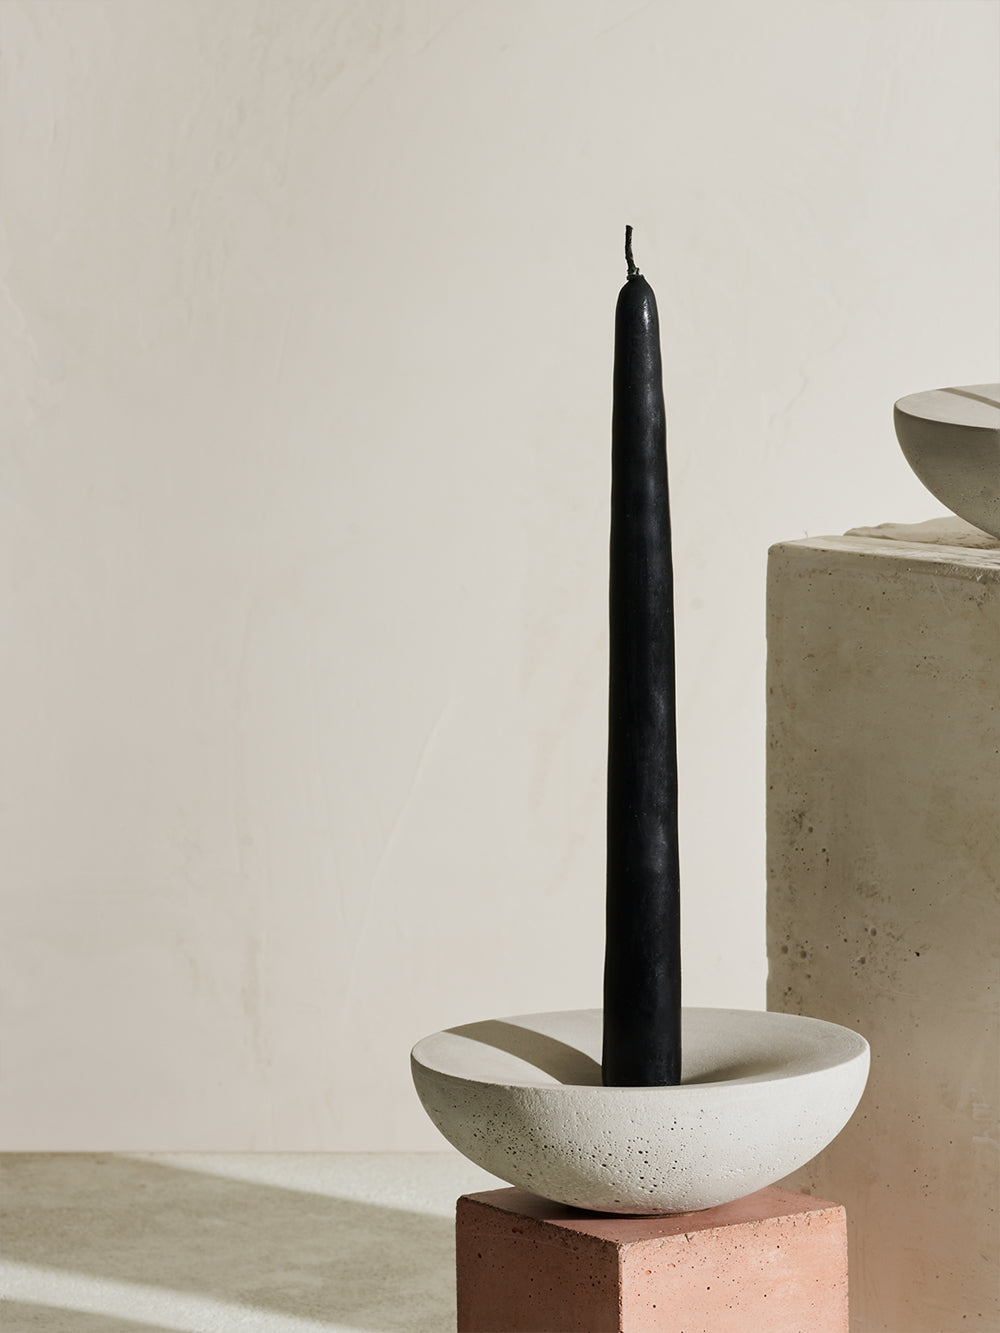 Concrete Vorta being used candle stick holder